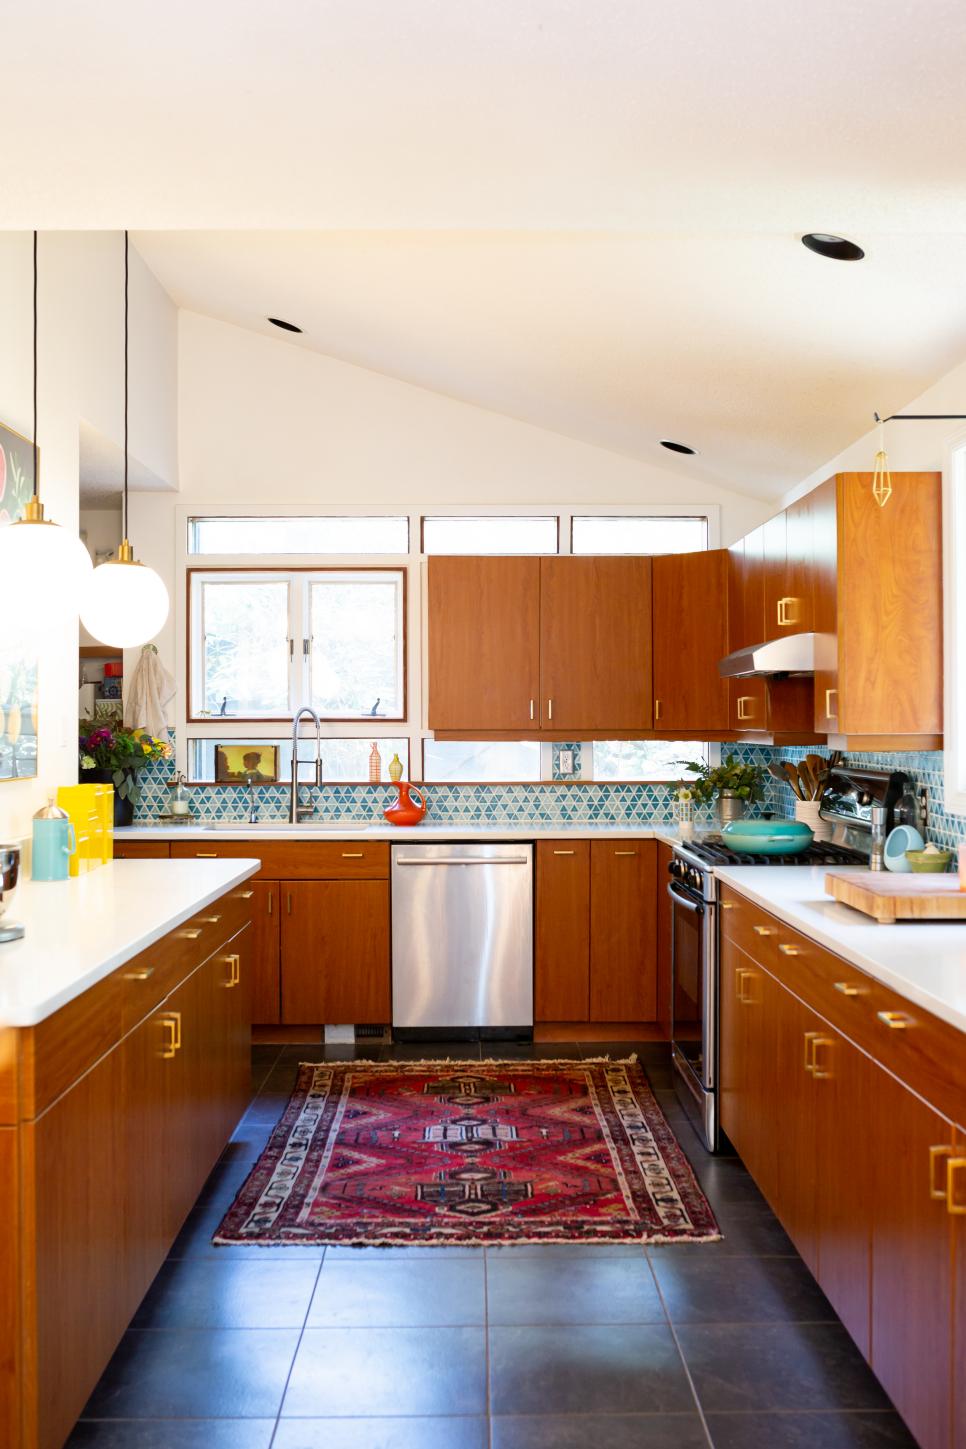 Midcentury Modern Kitchen Is Filled With Lots of Color | HGTV